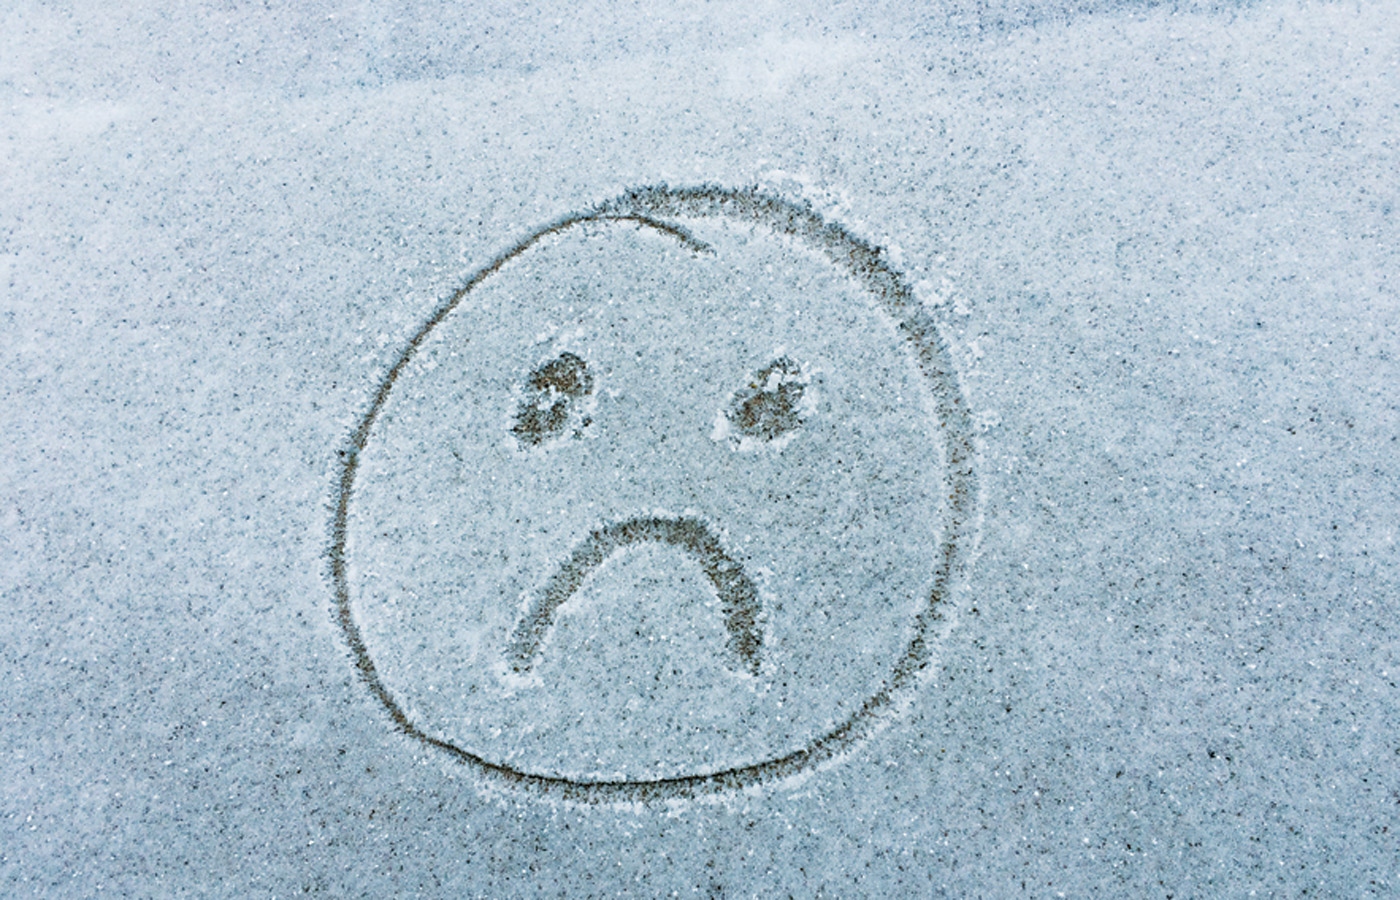 Seasonal Affective Disorder: Recognizing and Treating It